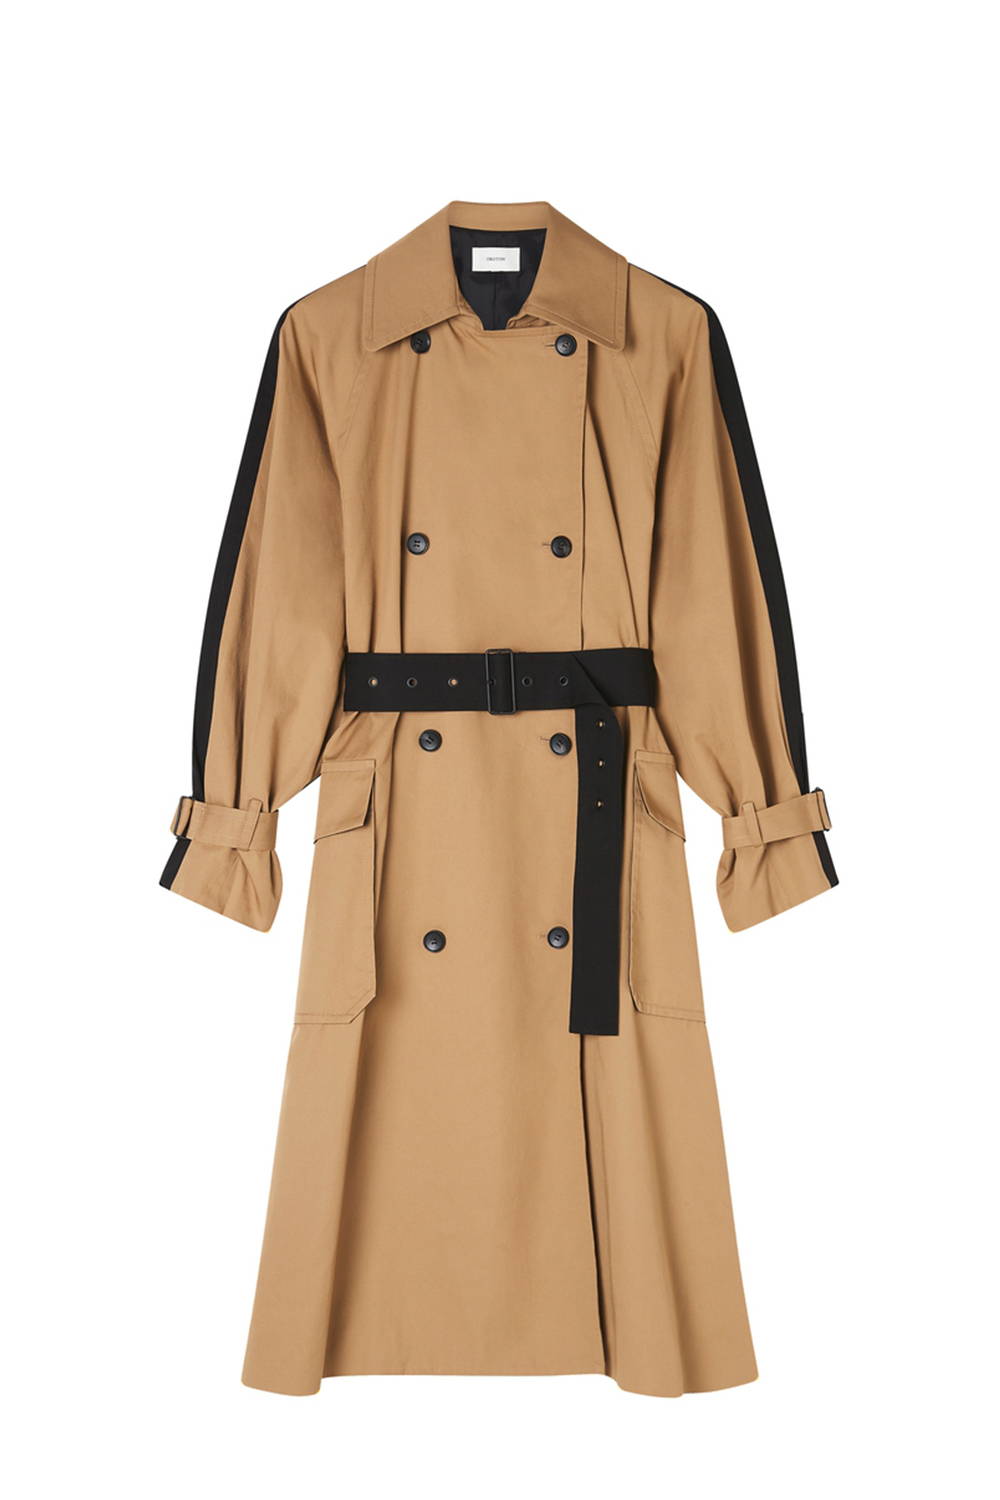 Oroton Colour Blocked Trench Coat in Camel and Black